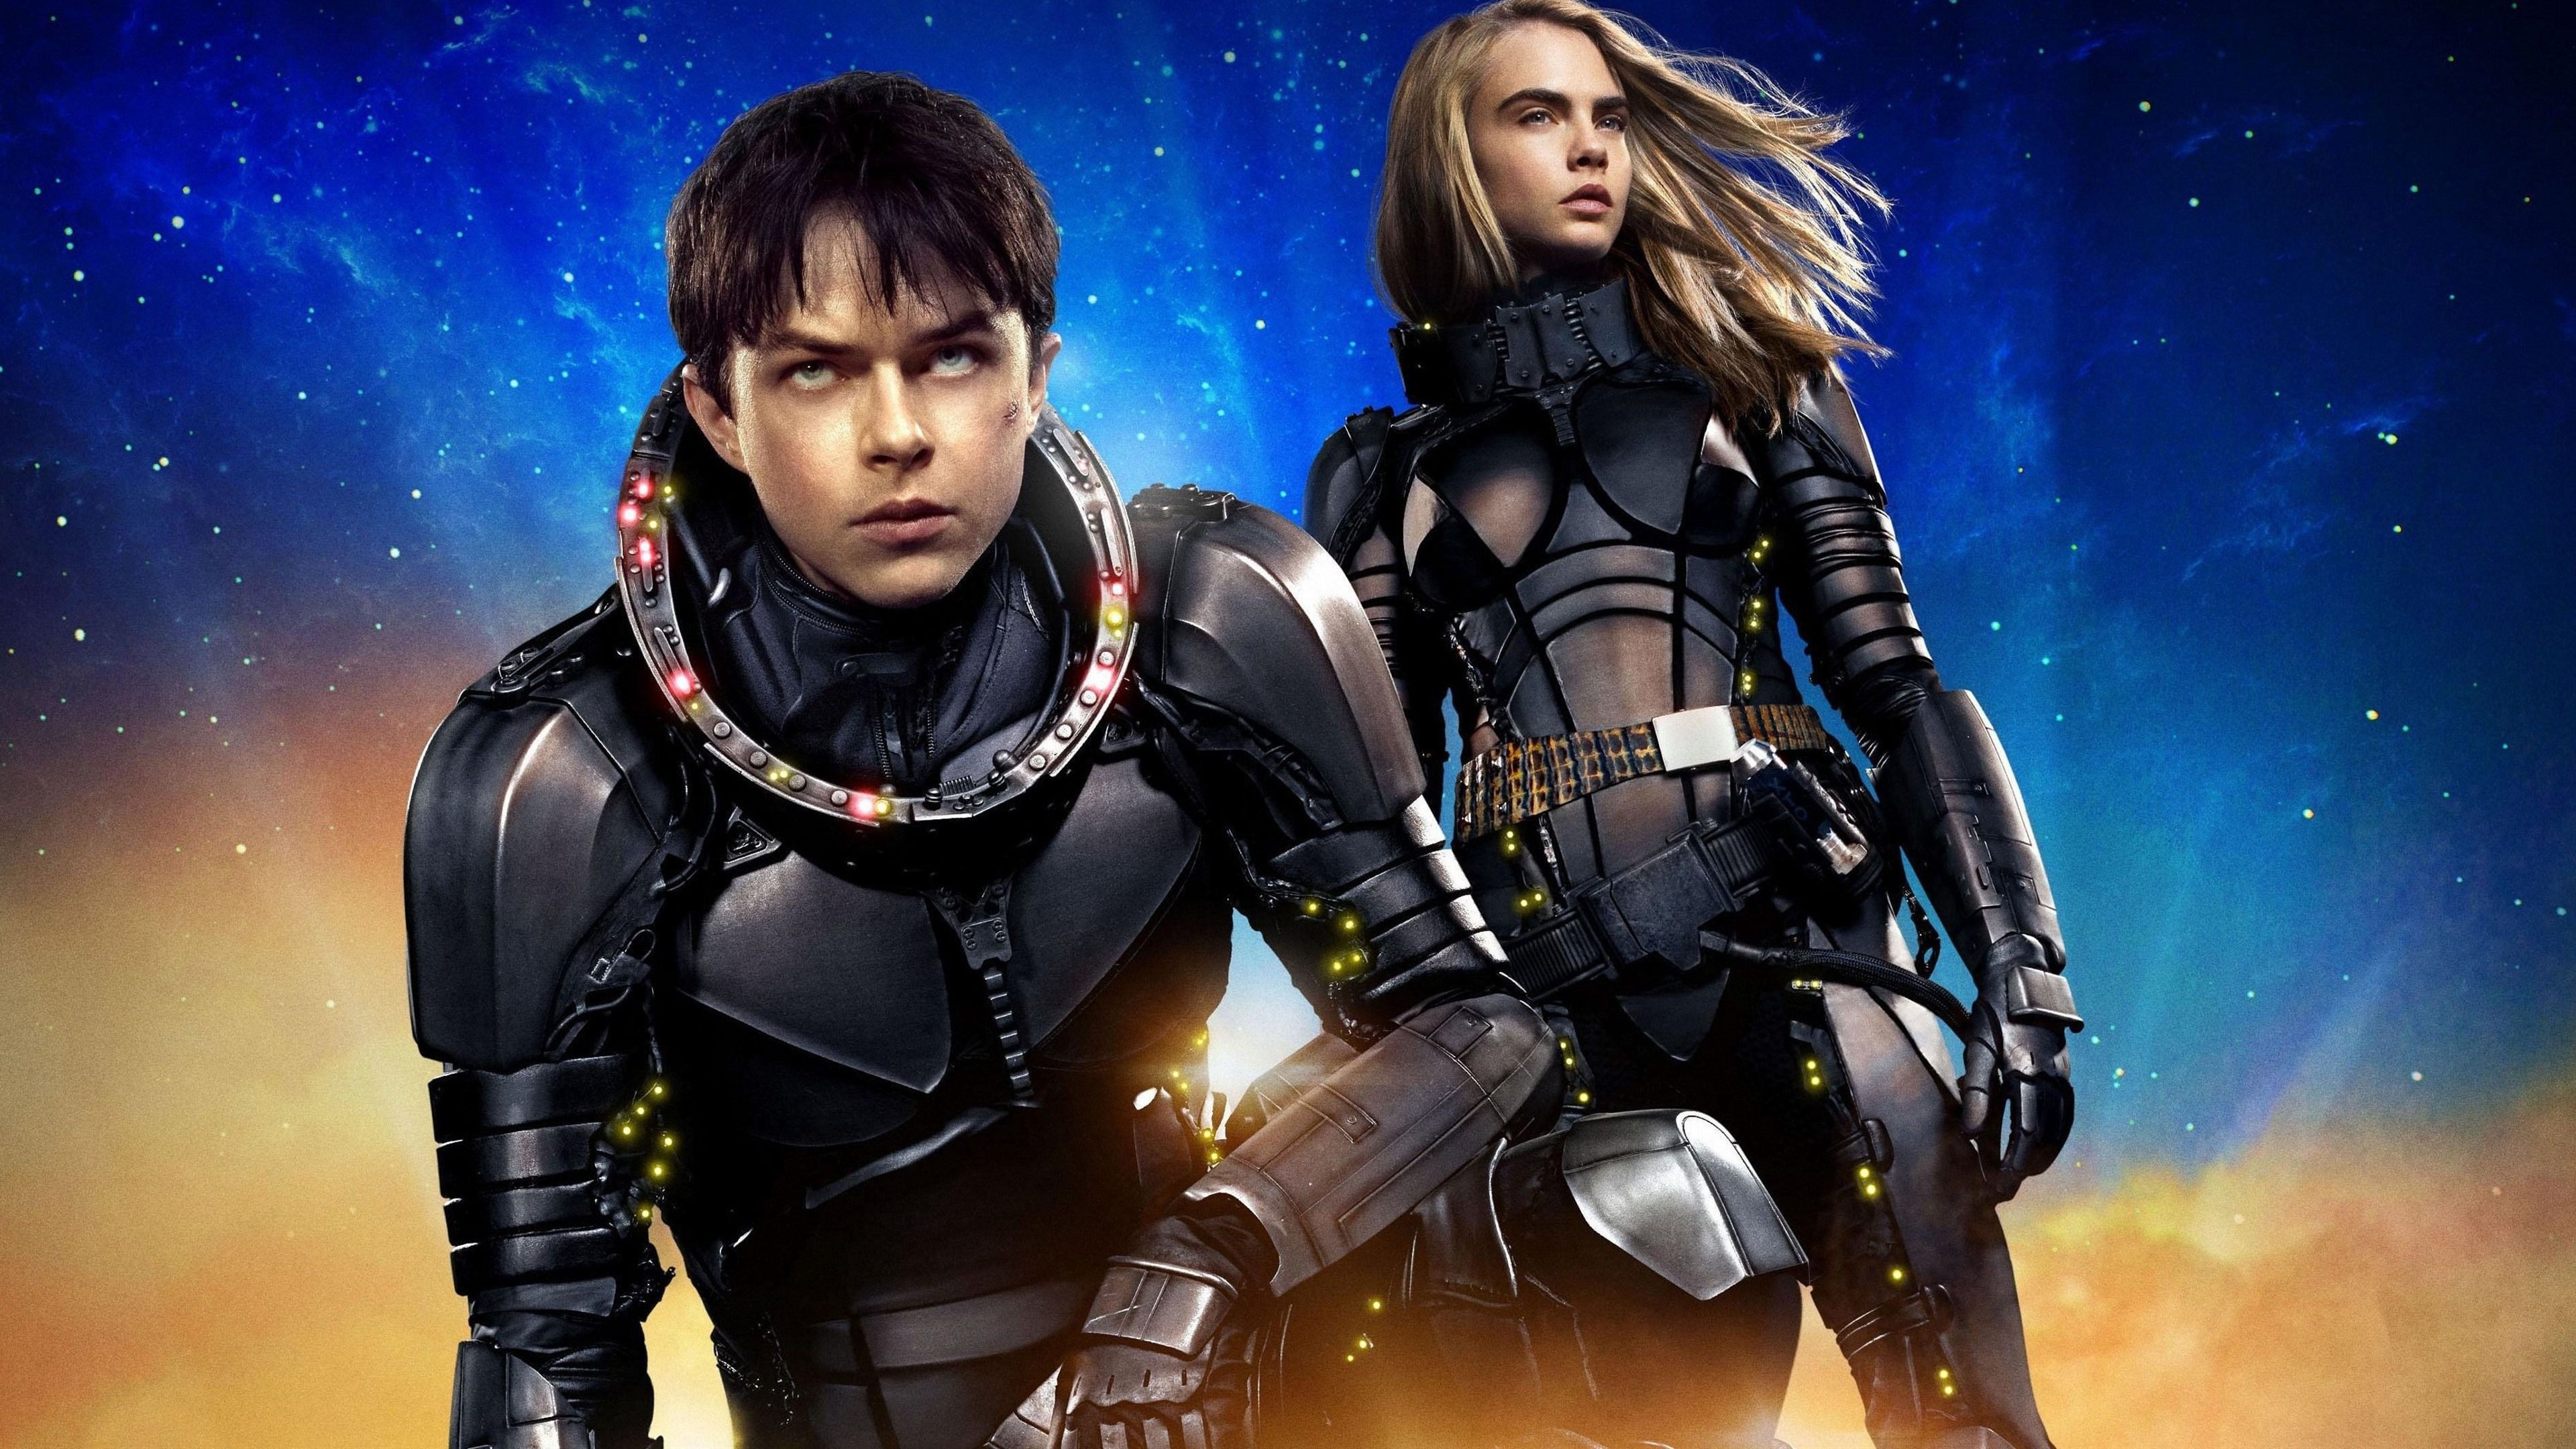 Wallpaper Valerian and the City of a Thousand Planets, Science fiction movie 3840x2160 UHD 4K Picture, Image